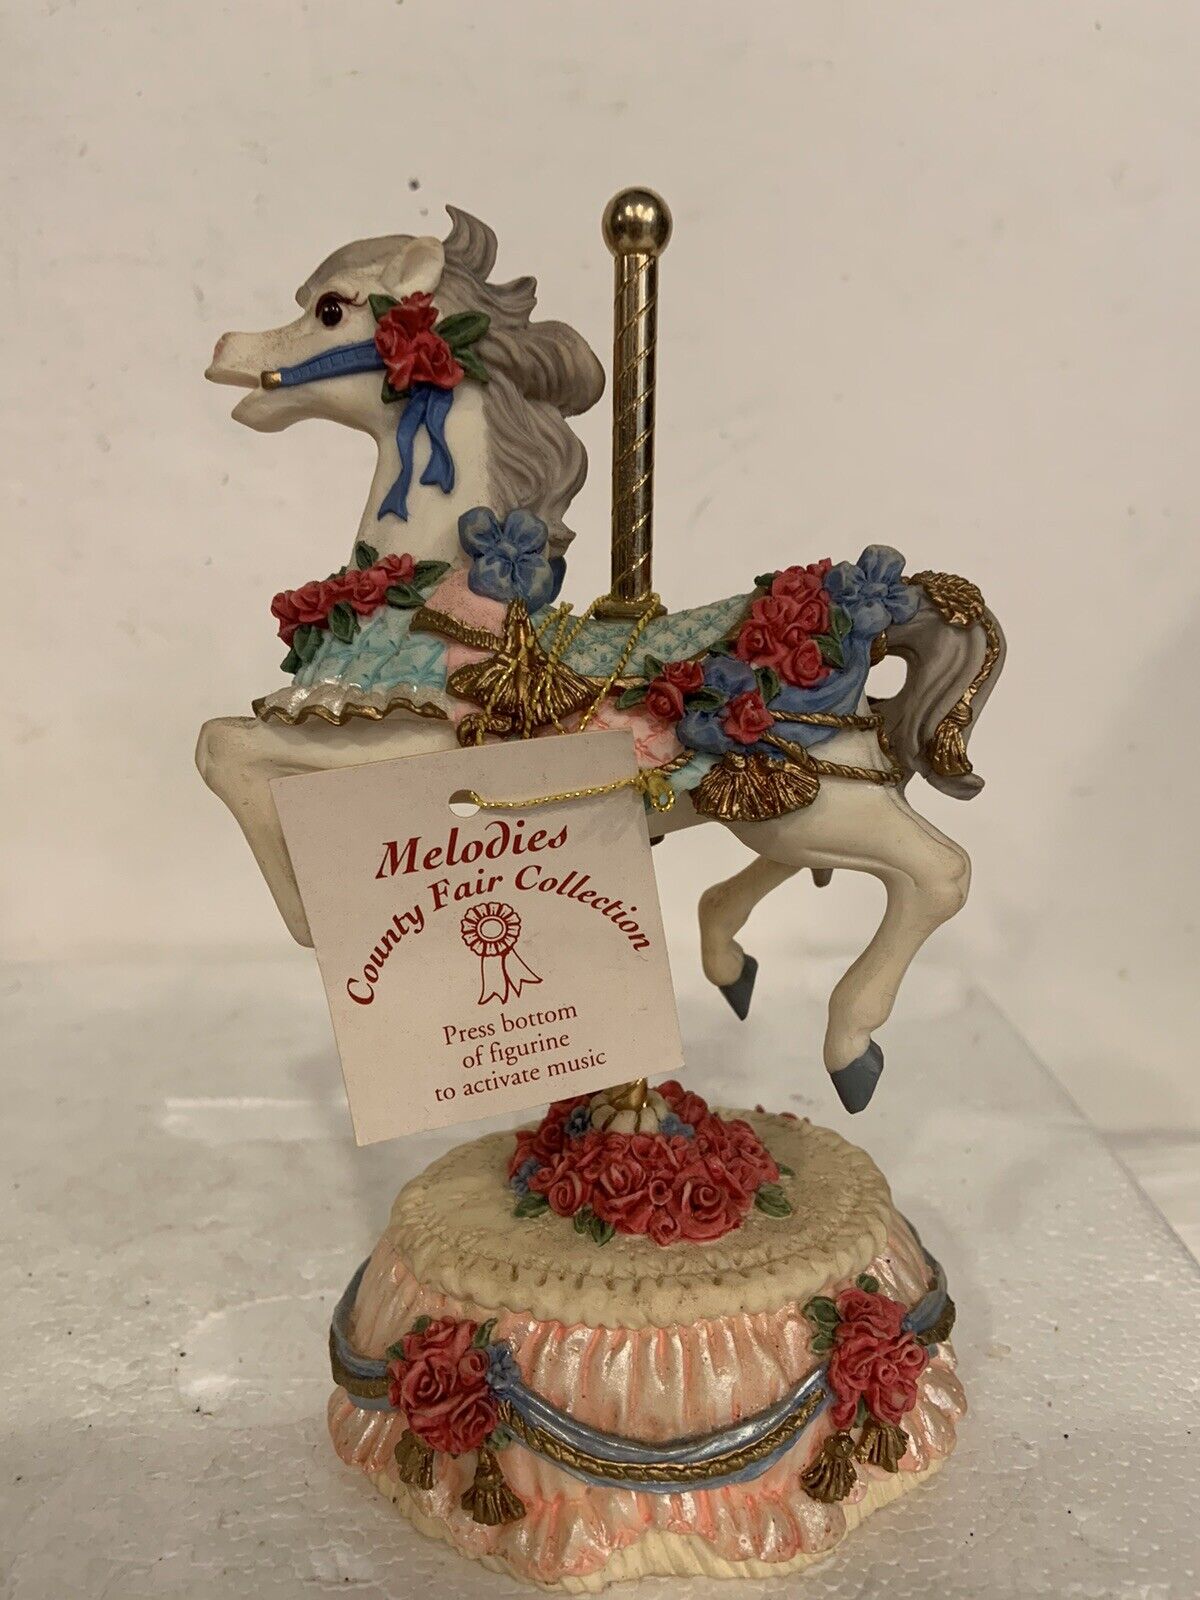 Vntg Carousel Horse Music Box Heritage House County Fair Collection “Yesterday “